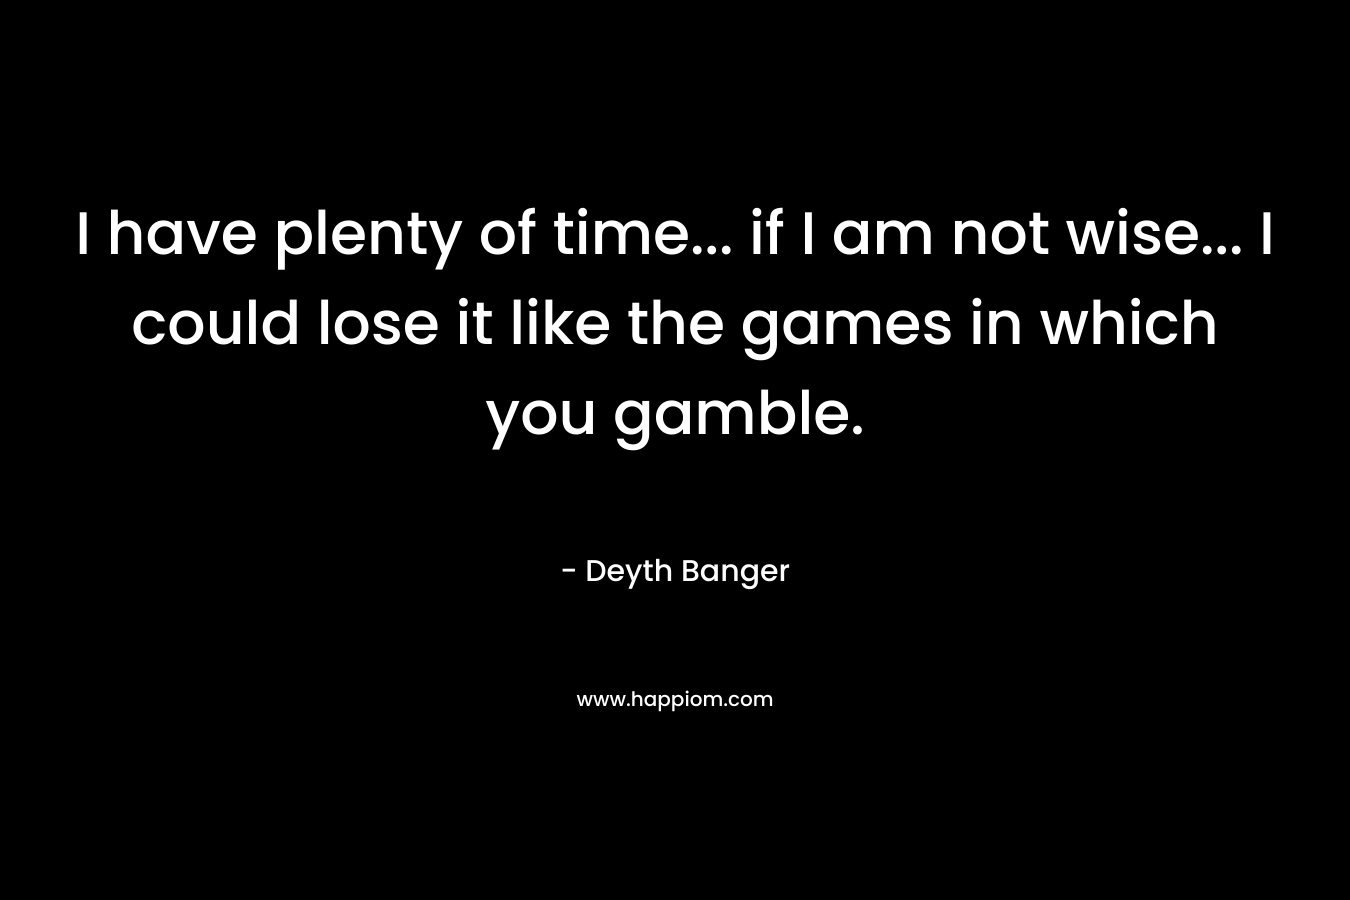 I have plenty of time… if I am not wise… I could lose it like the games in which you gamble. – Deyth Banger